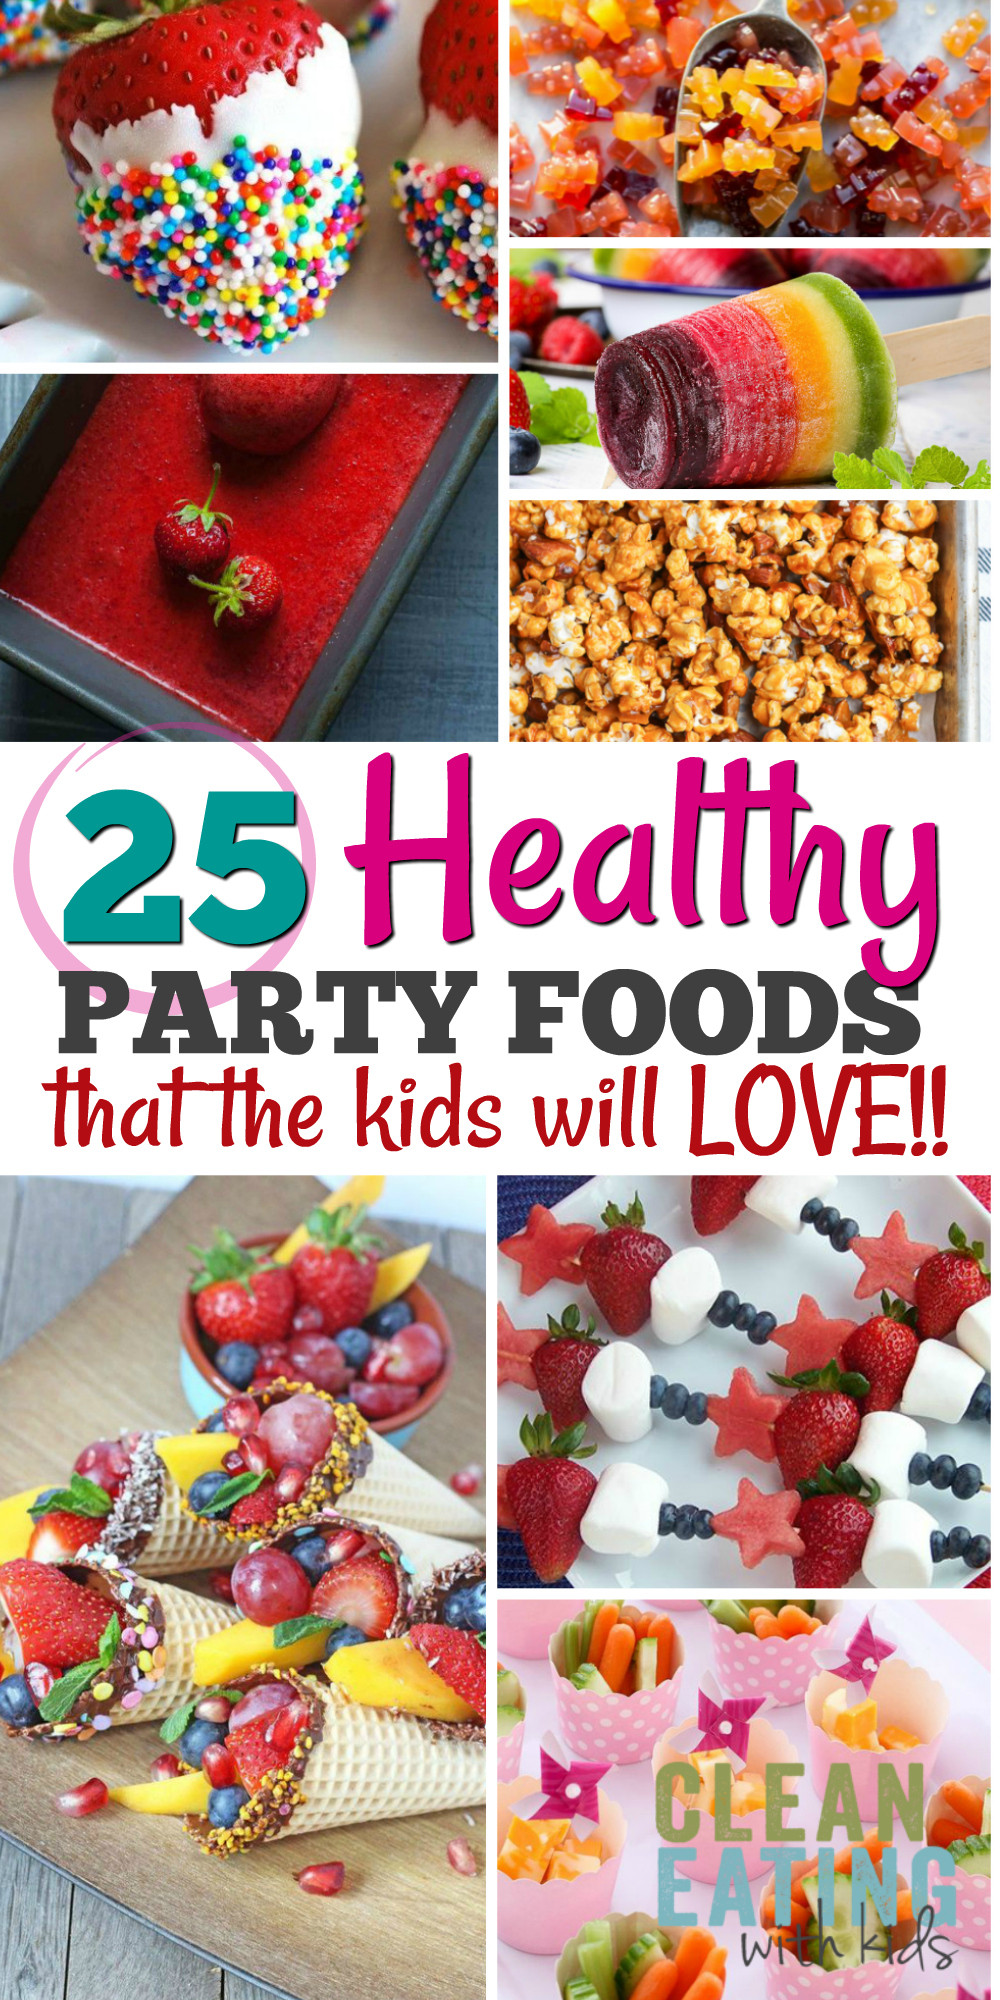 Birthday Party Snack Food Ideas
 25 Healthy Birthday Party Food Ideas Clean Eating with kids